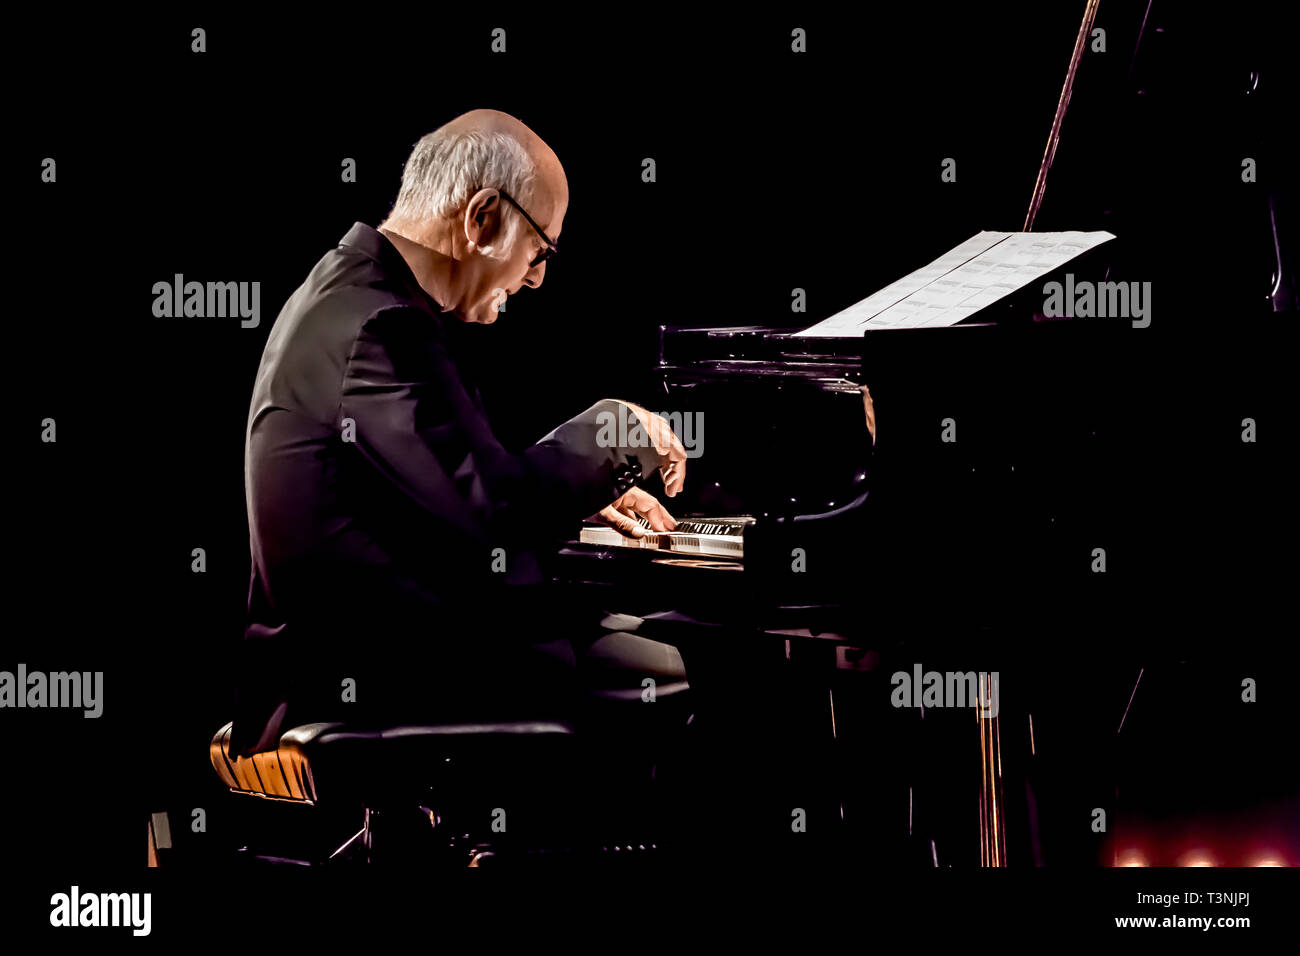 Parma, Italy. 10th Apr, 2019. After the success of the ‘ensemble' concert in the 2015 edition, Ludovico Einaudi, famous Italian composer and pianist, Wednesday 10 April 2019 at 9.00 pm returns to the Teatro Regio di Parma with his new international tour, starting in March. Ludovico Einaudi, born in Turin in 1955, is an Italian composer and pianist known and appreciated throughout the world for his concerts, his famous soundtracks and his recording career. Credit: Luigi Rizzo/Pacific Press/Alamy Live News Stock Photo